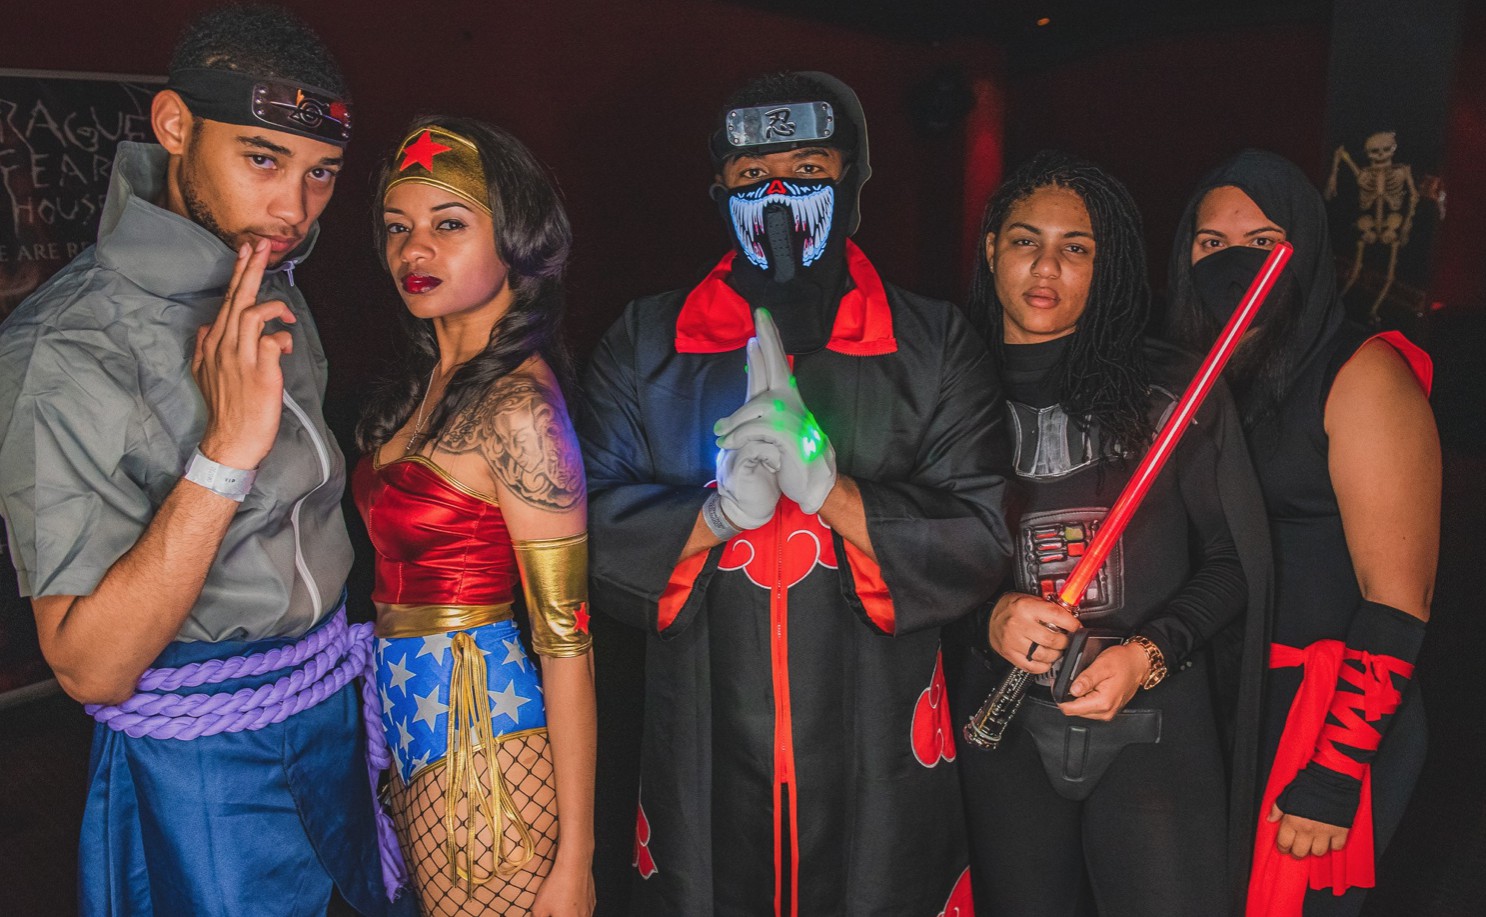 halloween party nyc 2020 Dirty Clown Halloween Nyc S Biggest Halloween Weekend Party 2021 Tickets Fri Oct 29 2021 At 9 00 Pm Eventbrite halloween party nyc 2020